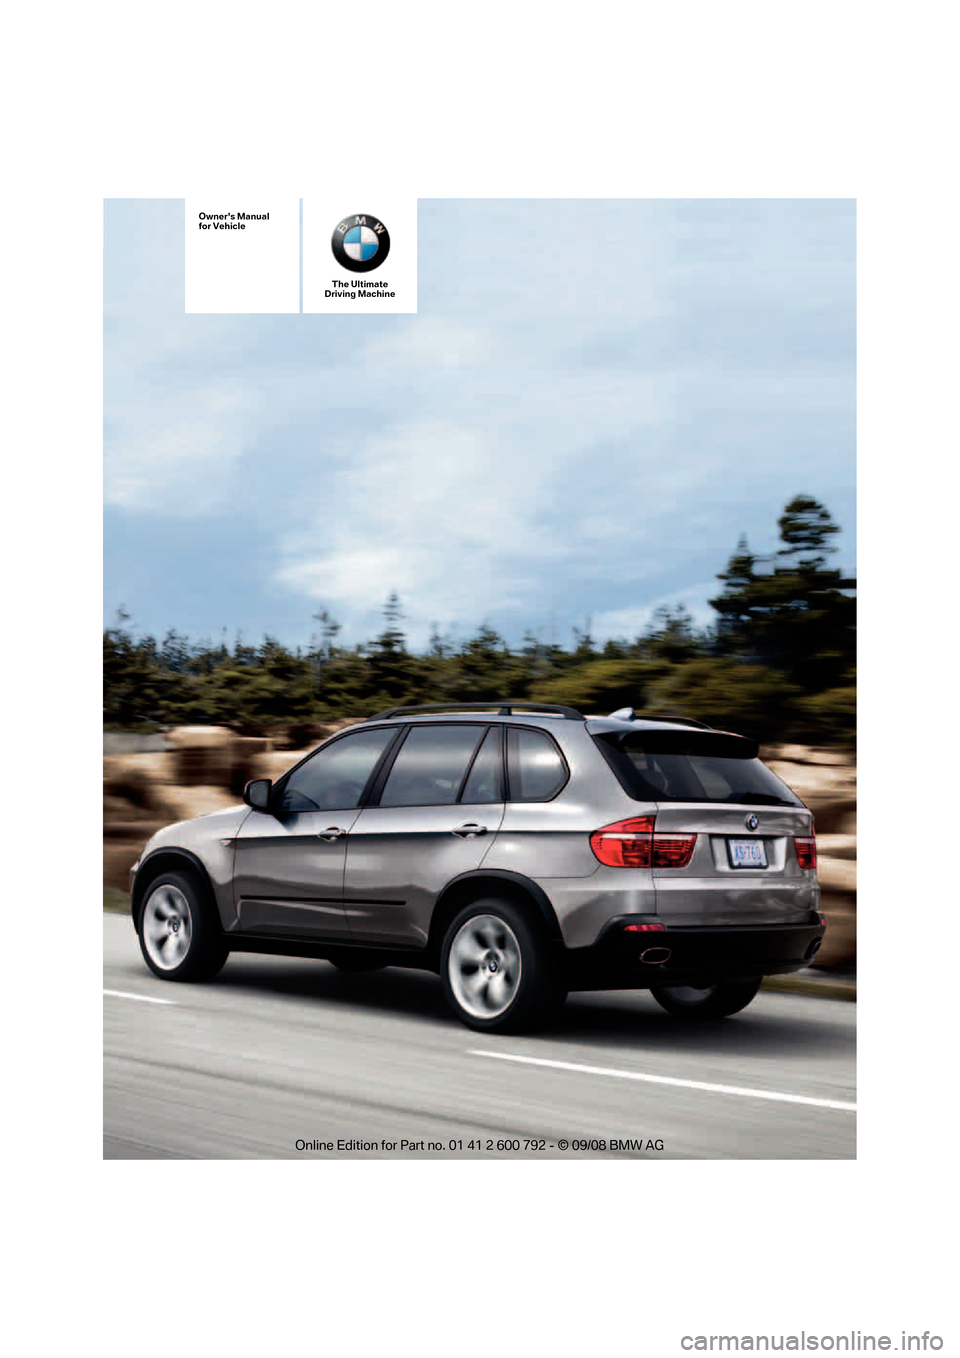 BMW X5 XDRIVE 48I 2009 E70 Owners Manual The Ultimate
Driving Machine
Owners Manual
for Vehicle 